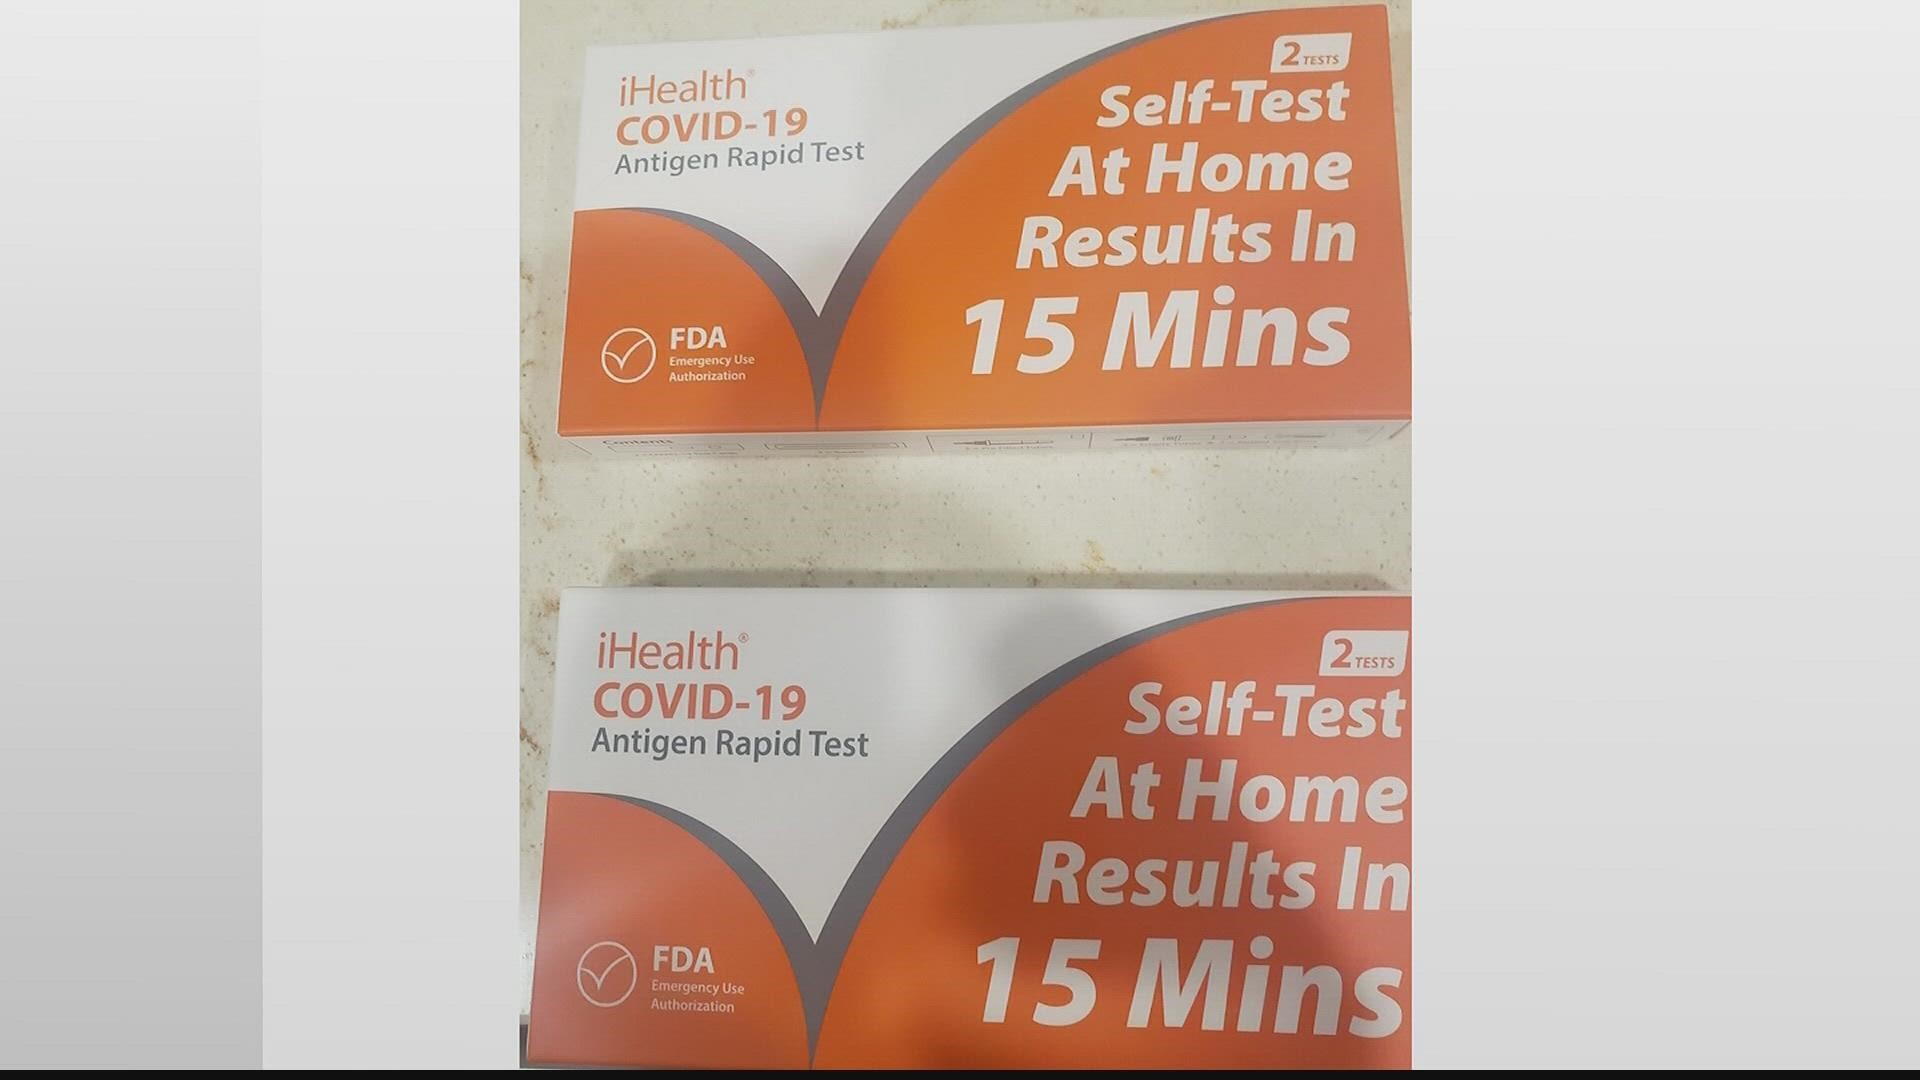 Depending on the COVID-19 rapid test, the expiration date may have been extended beyond what's listed on the package. Here's how to find out the right date.